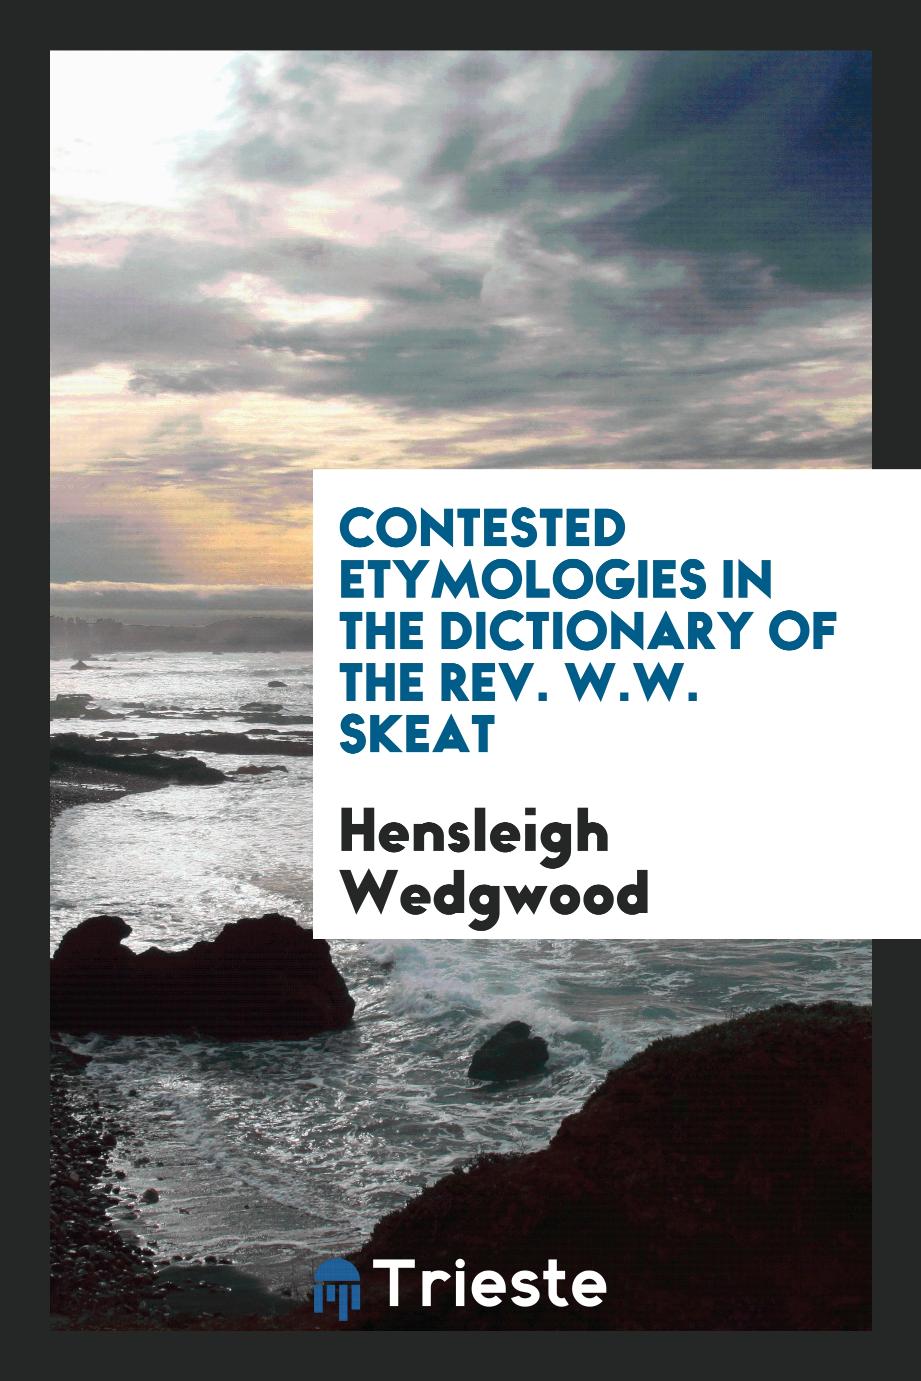 Contested etymologies in the dictionary of the Rev. W.W. Skeat